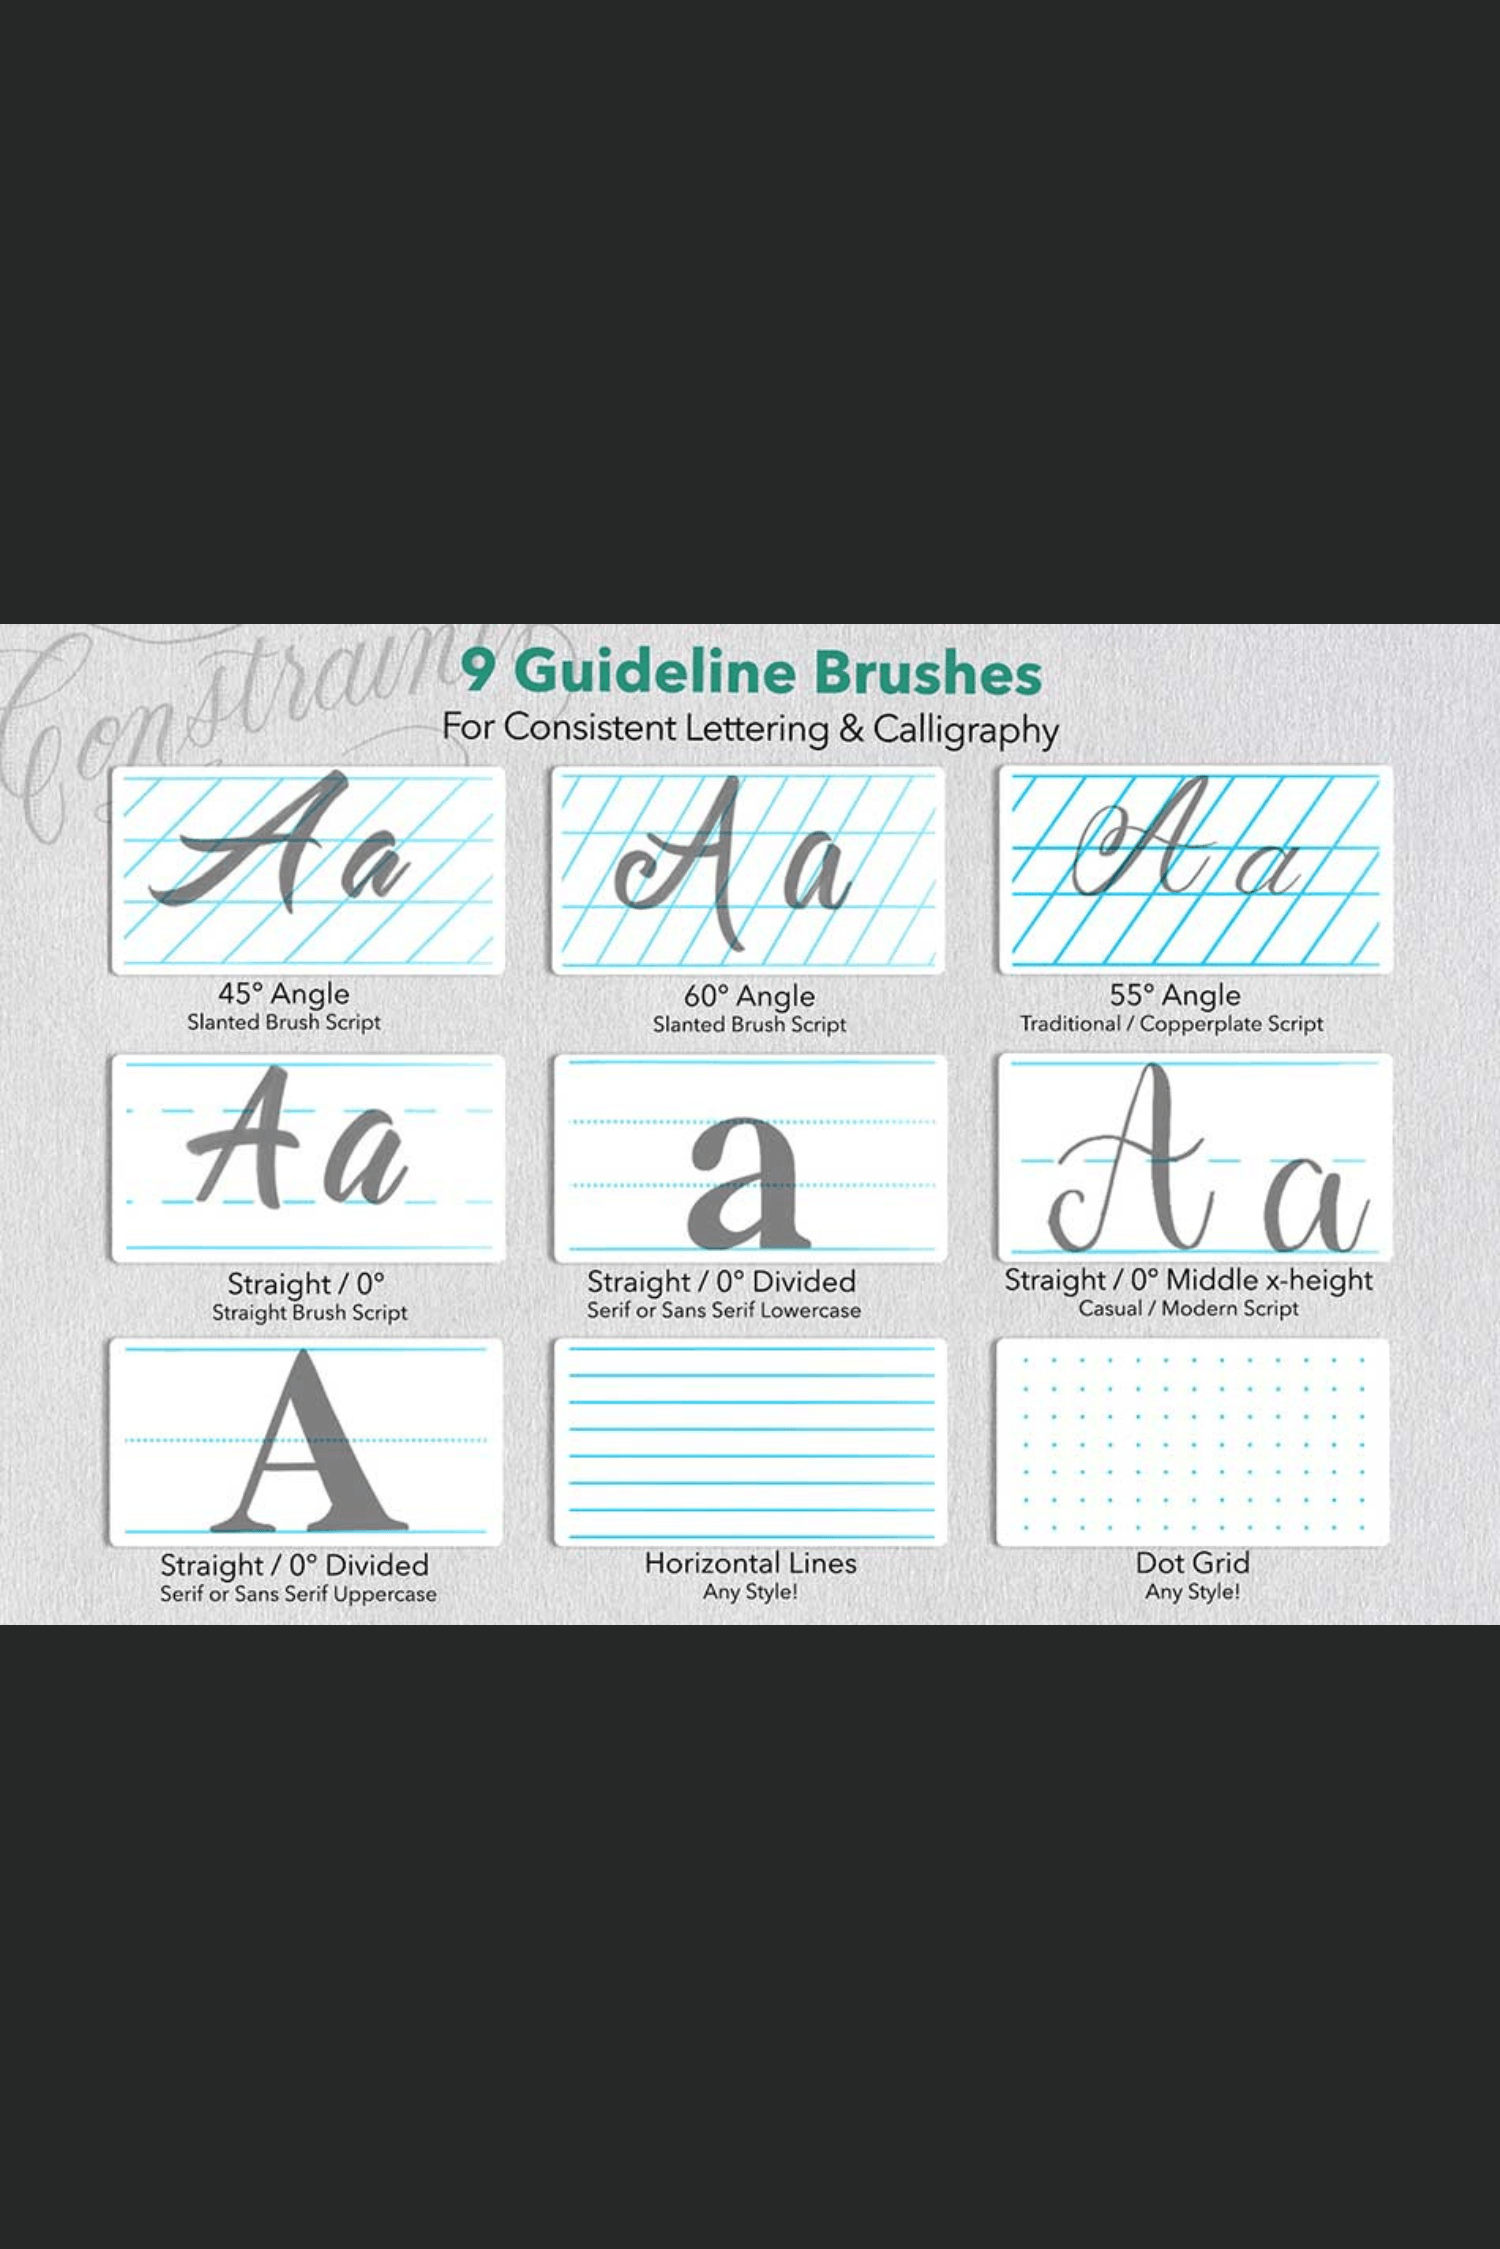 Essentials for Calligraphy Toolkit by Ipad Calligraphy